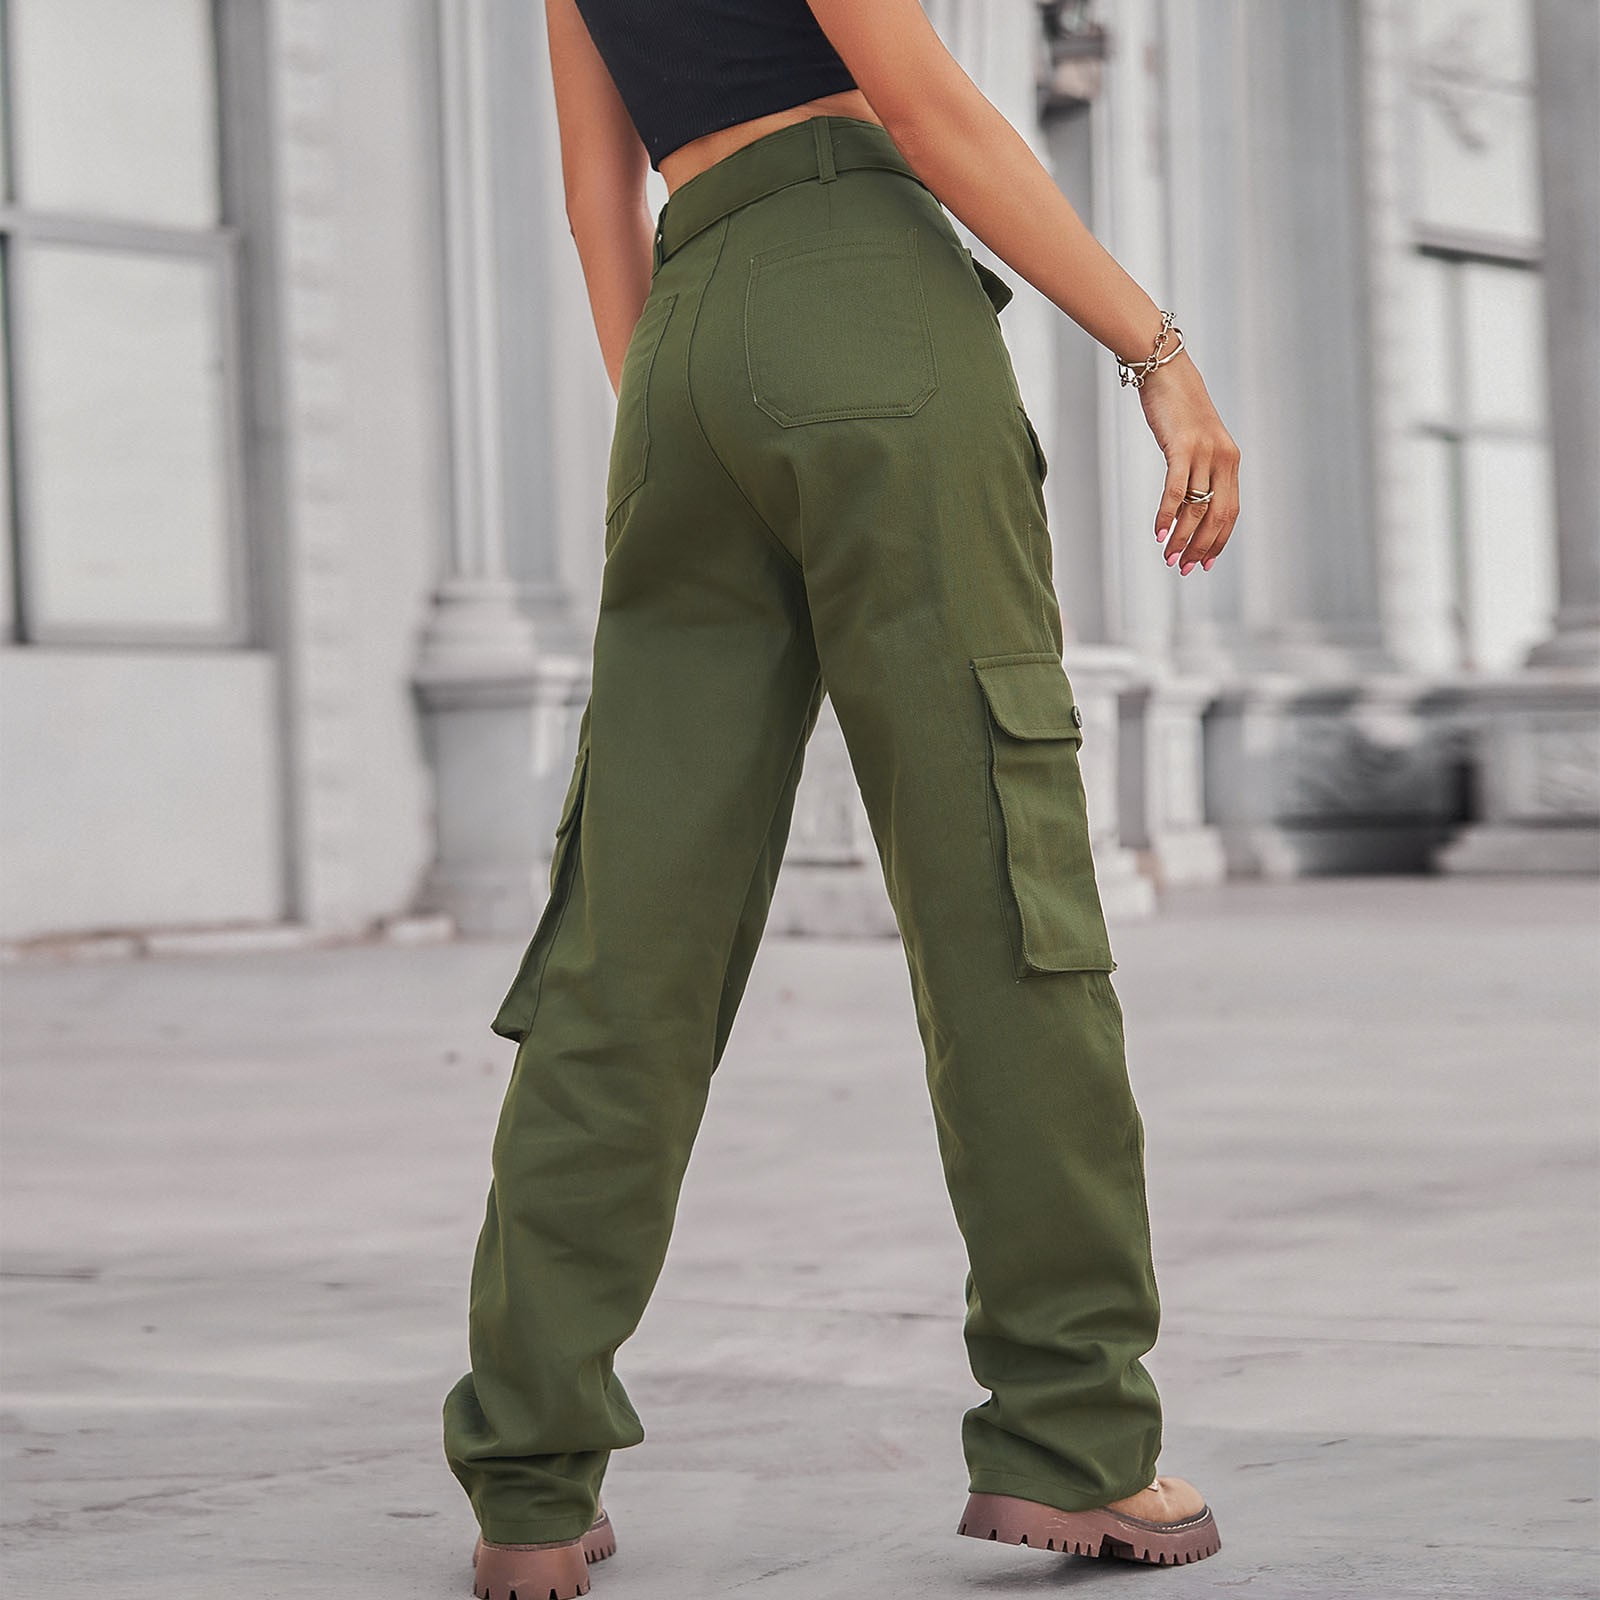 Womens Jeans Womens 90s Y2K Patch Work Wide Leg Mom Jeans Vintage Mop Pants  Casual Street Clothing Boyfriend Jeans Large Pocket Cargo Pants Z230728  From Misihan01, $4.23